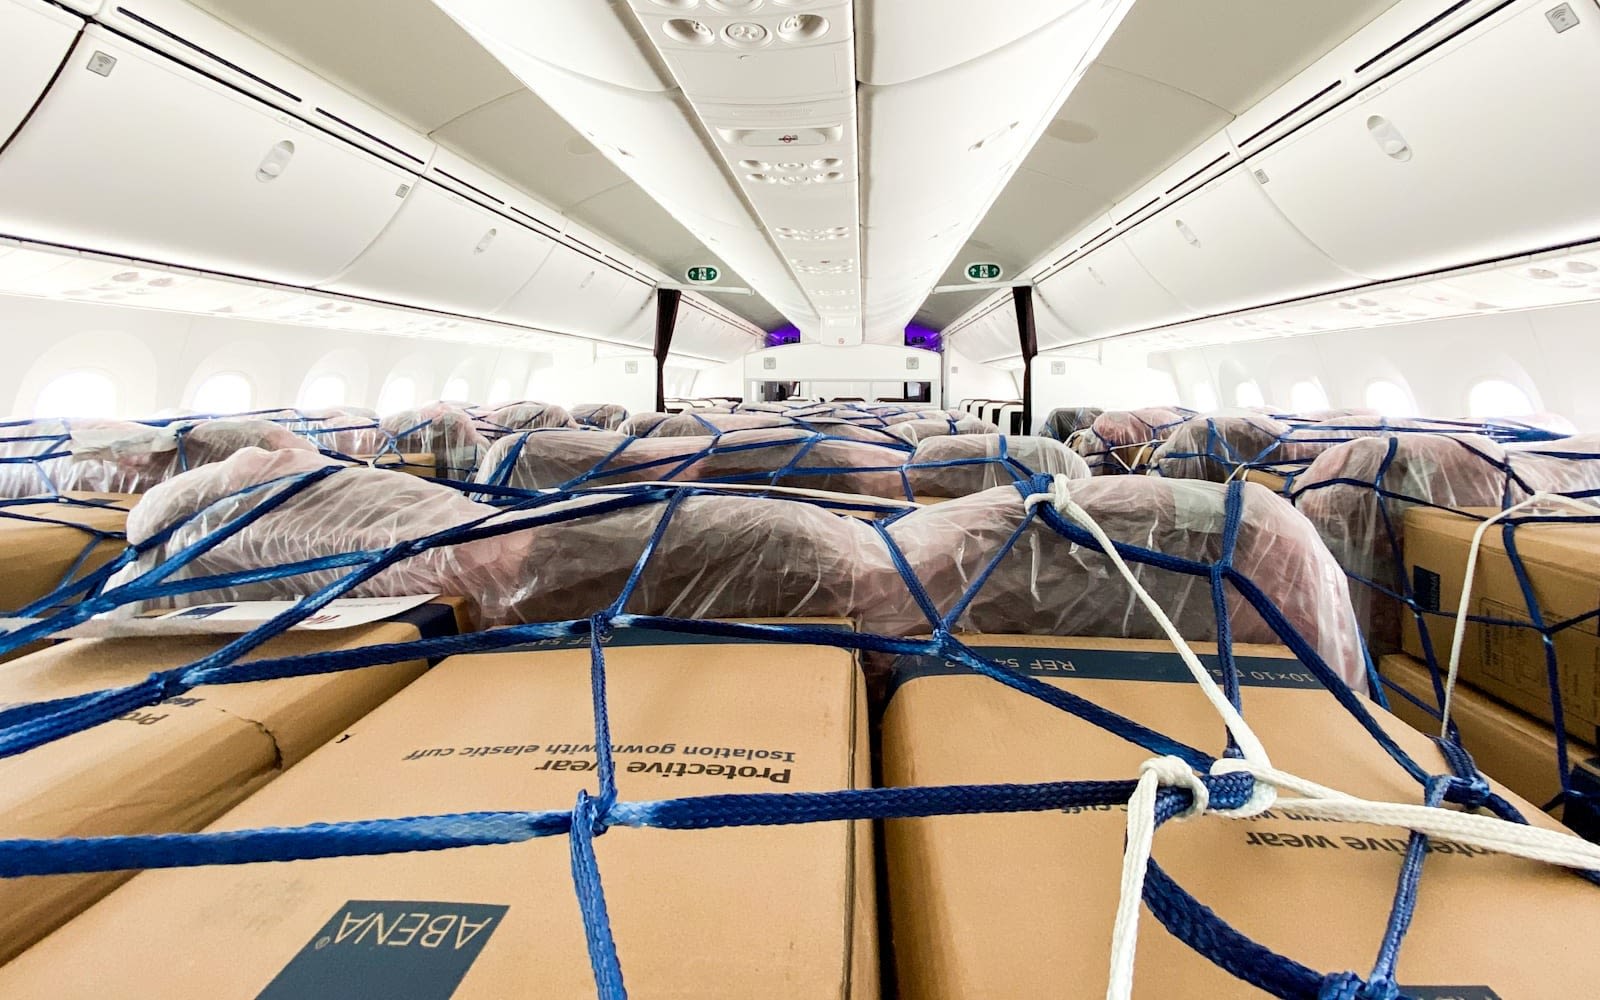 picure of boxed protective wear in the cargo area of a virgin plane ready for transport to help provide supplies for covid19